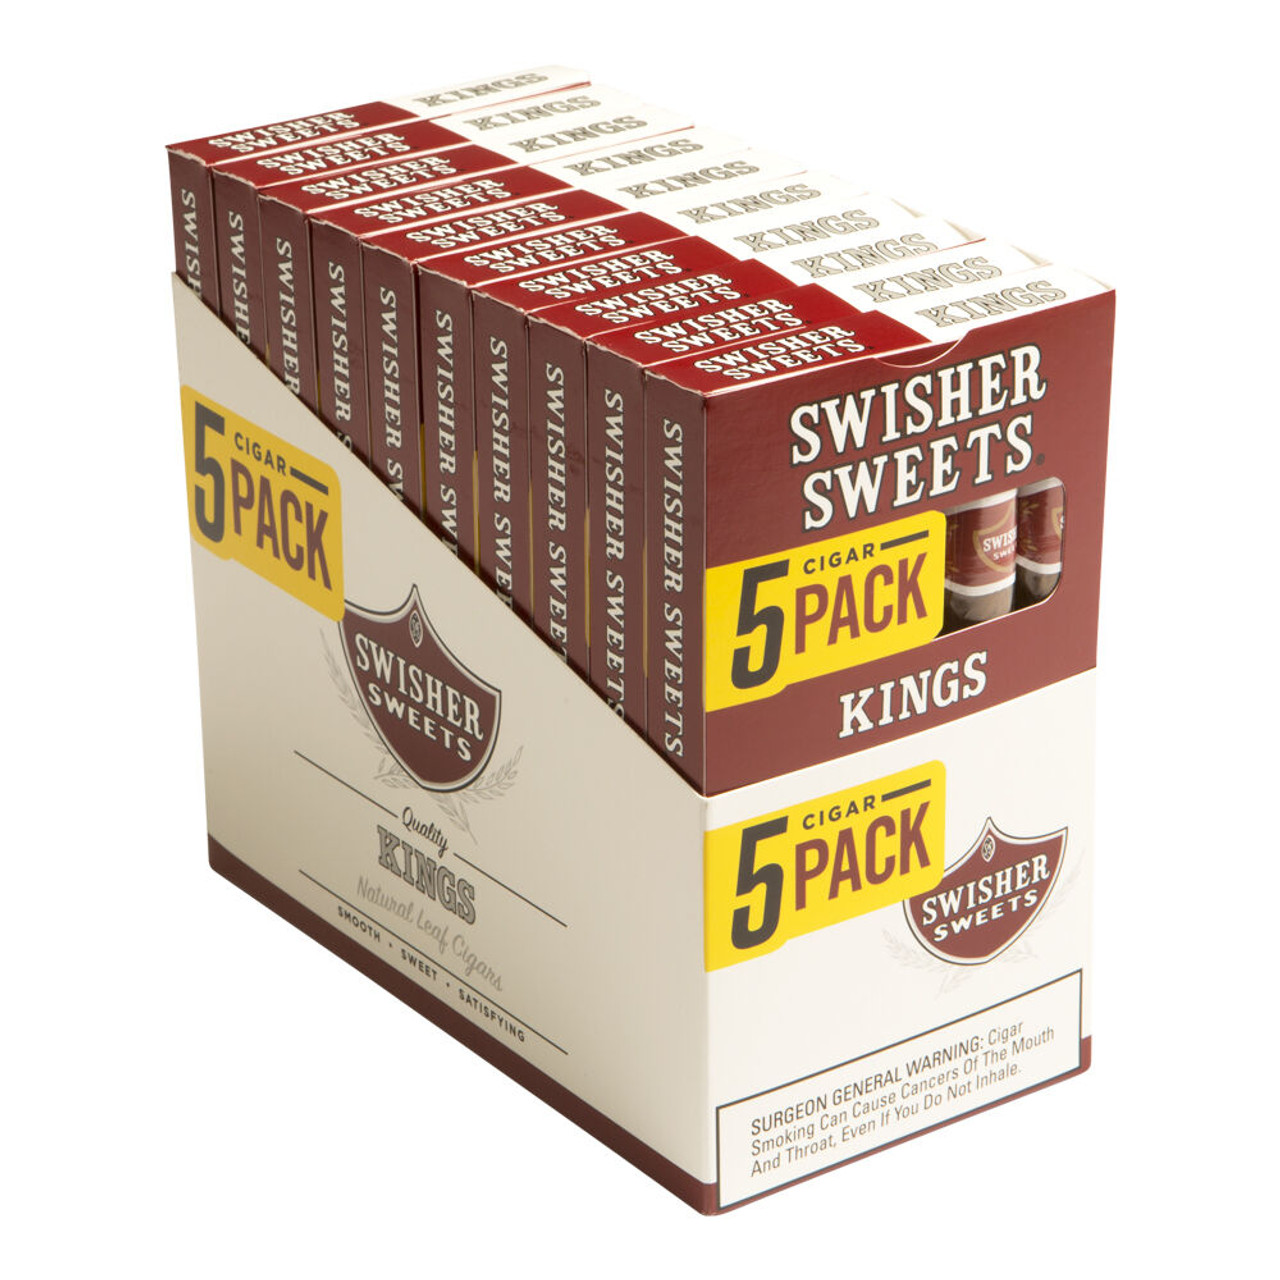 Swisher Sweets King Cigars - 5 x 40 (10 Packs of 5 (50 Total)) *Box